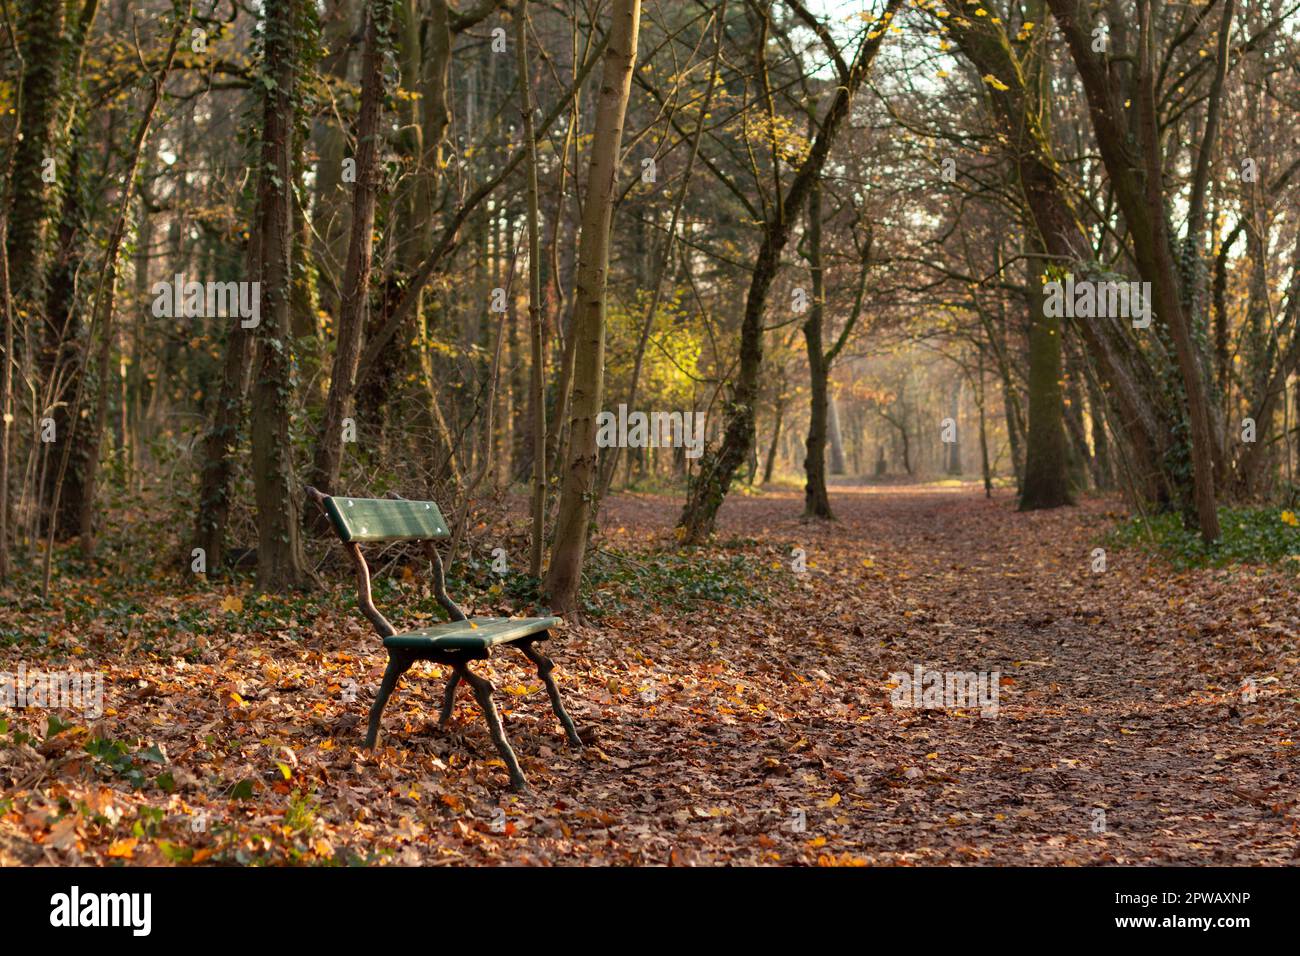 Empty bench on the side of a forest path covered in fallen leaves Stock Photo